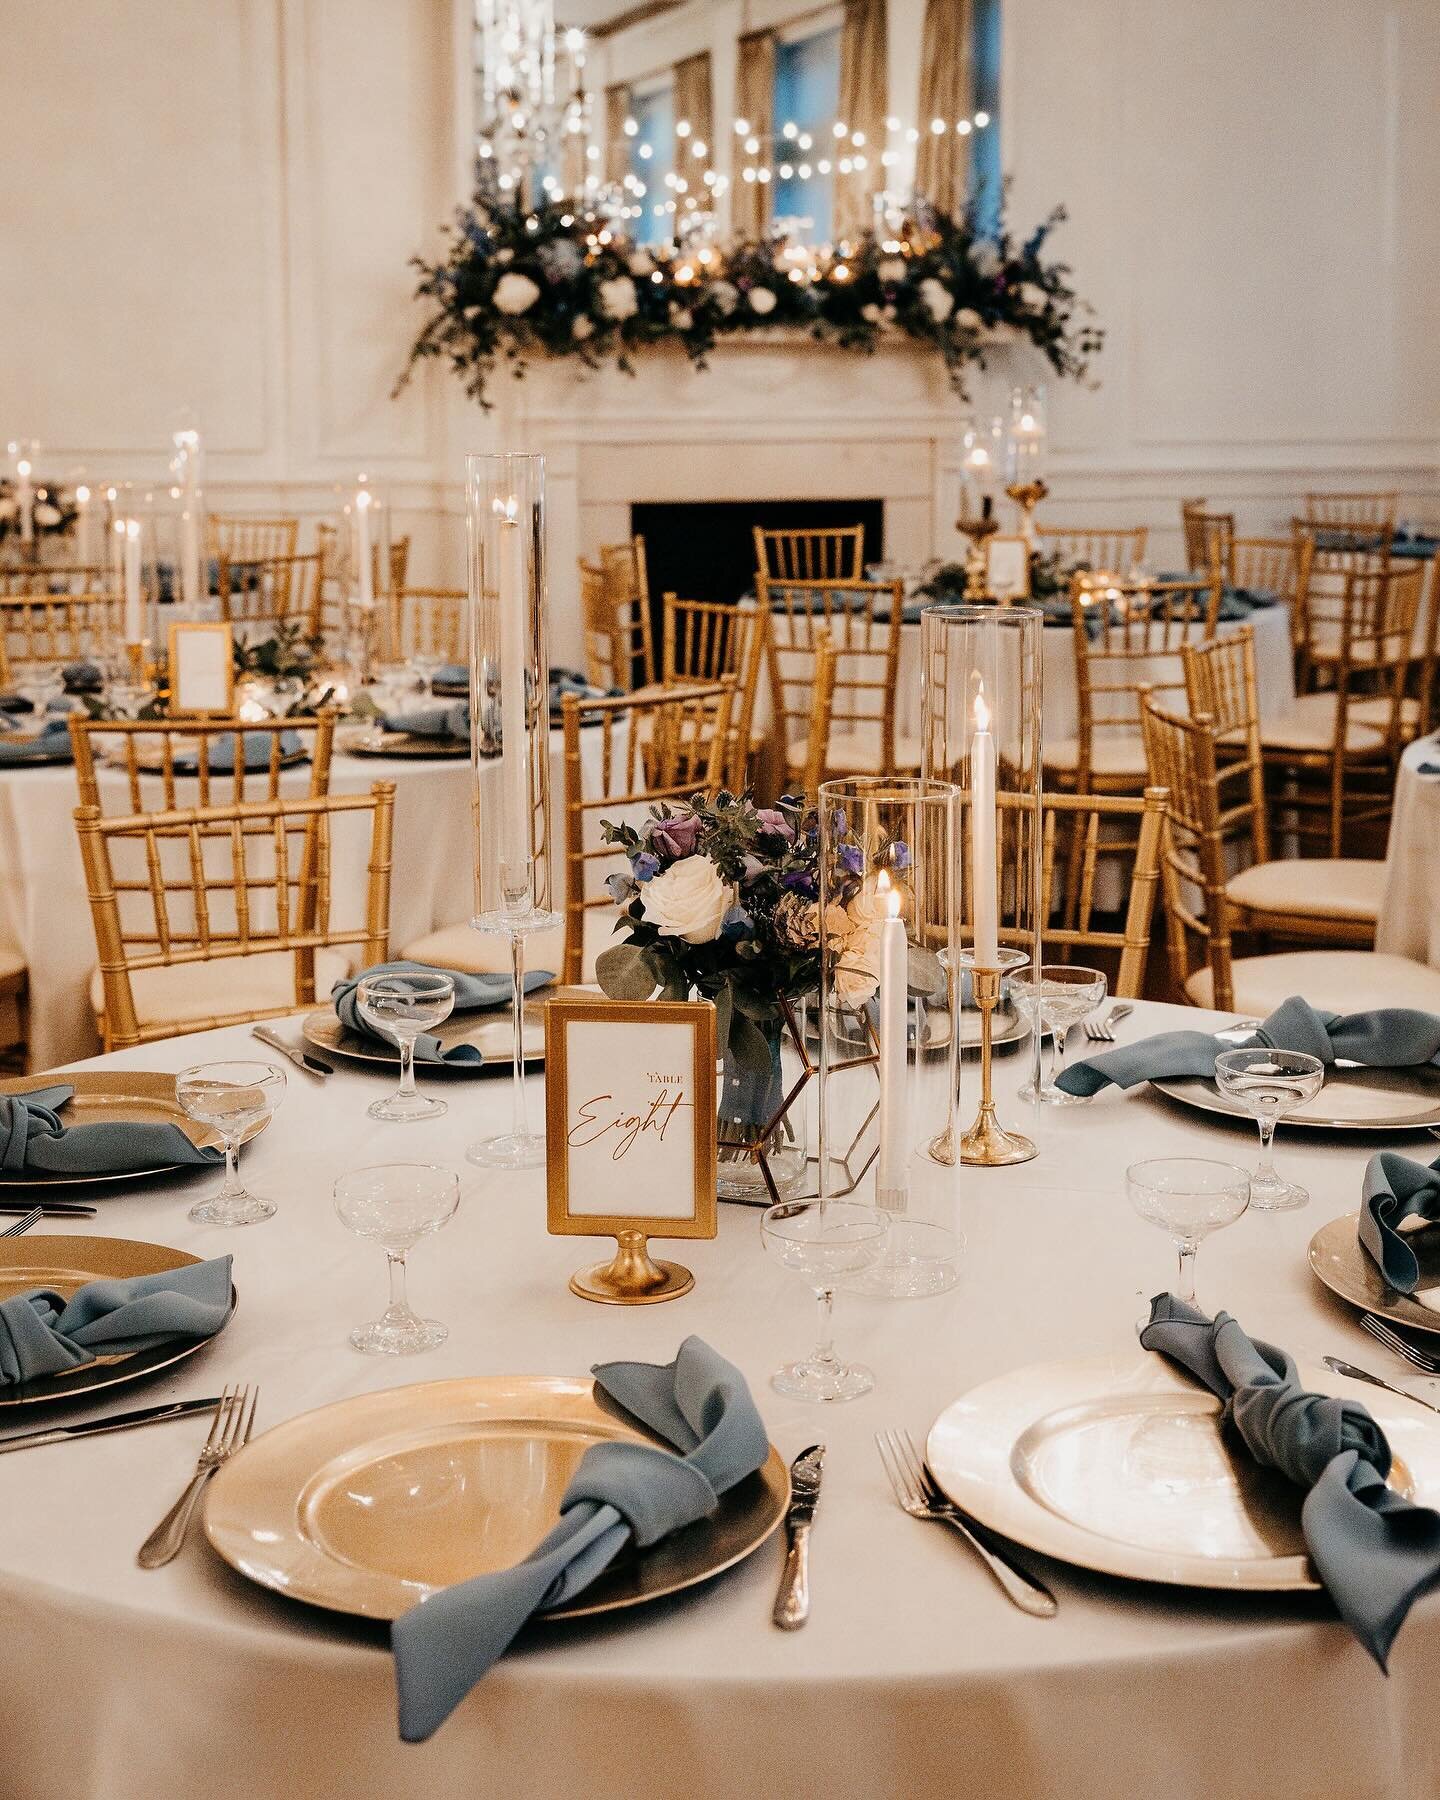 Let&rsquo;s talk d e c o r 🤍

Your decor session at our sister company Polished Events is where we bring your Pinterest boards to LIFE. Whether you&rsquo;ve had a vision for your wedding day since you were little or you are slowly piecing together t